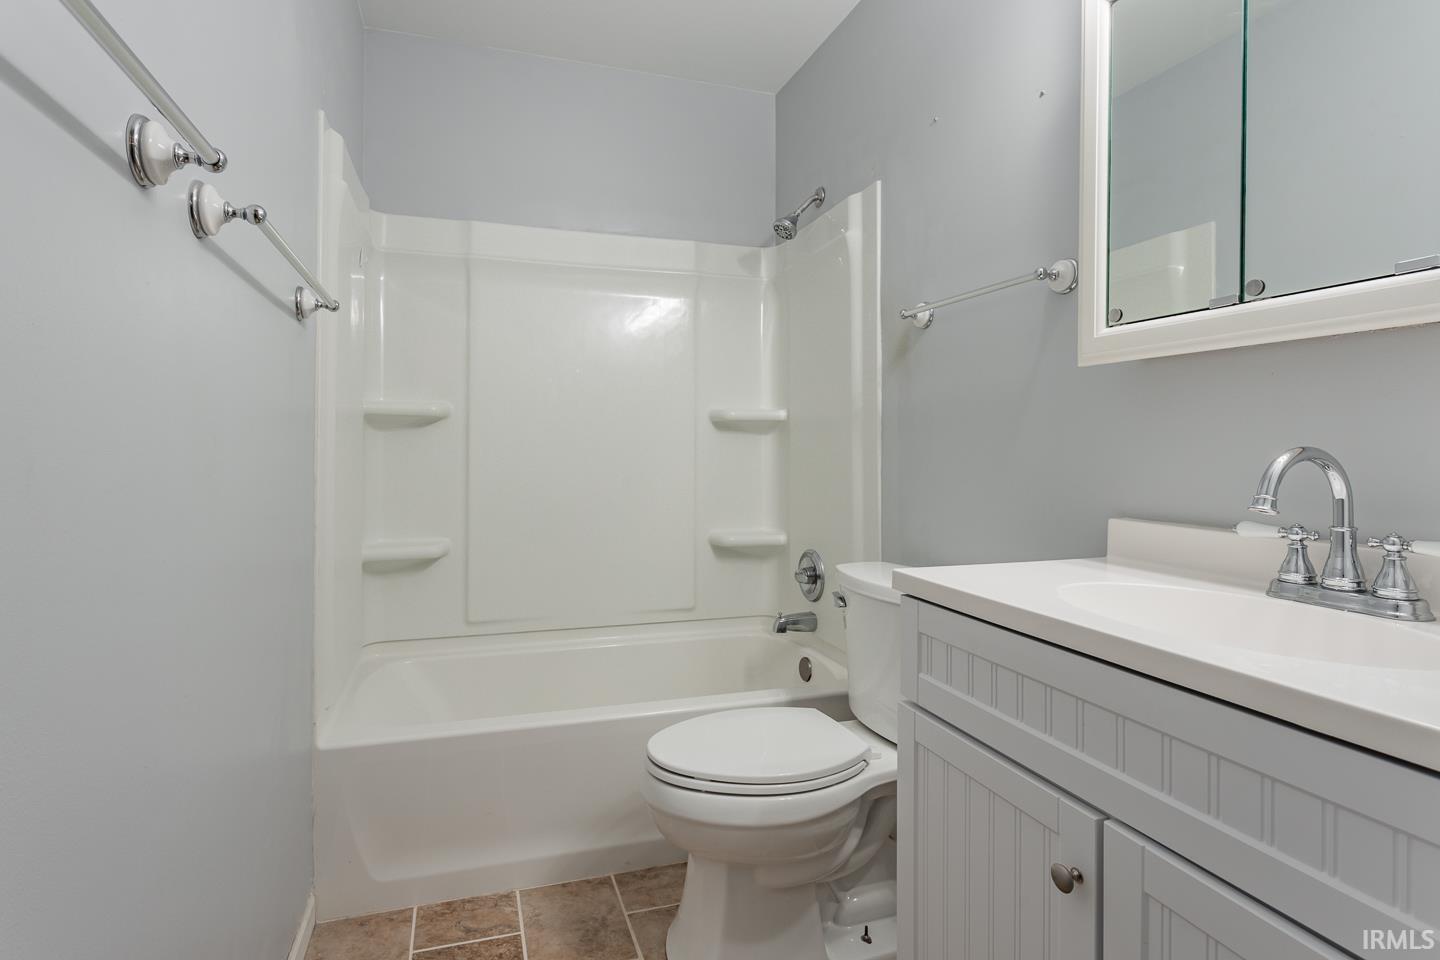 The upper level Full Bath has a linen closet and was updated in 2020 with new tub/shower combo, vanity, commode, and tile floor.